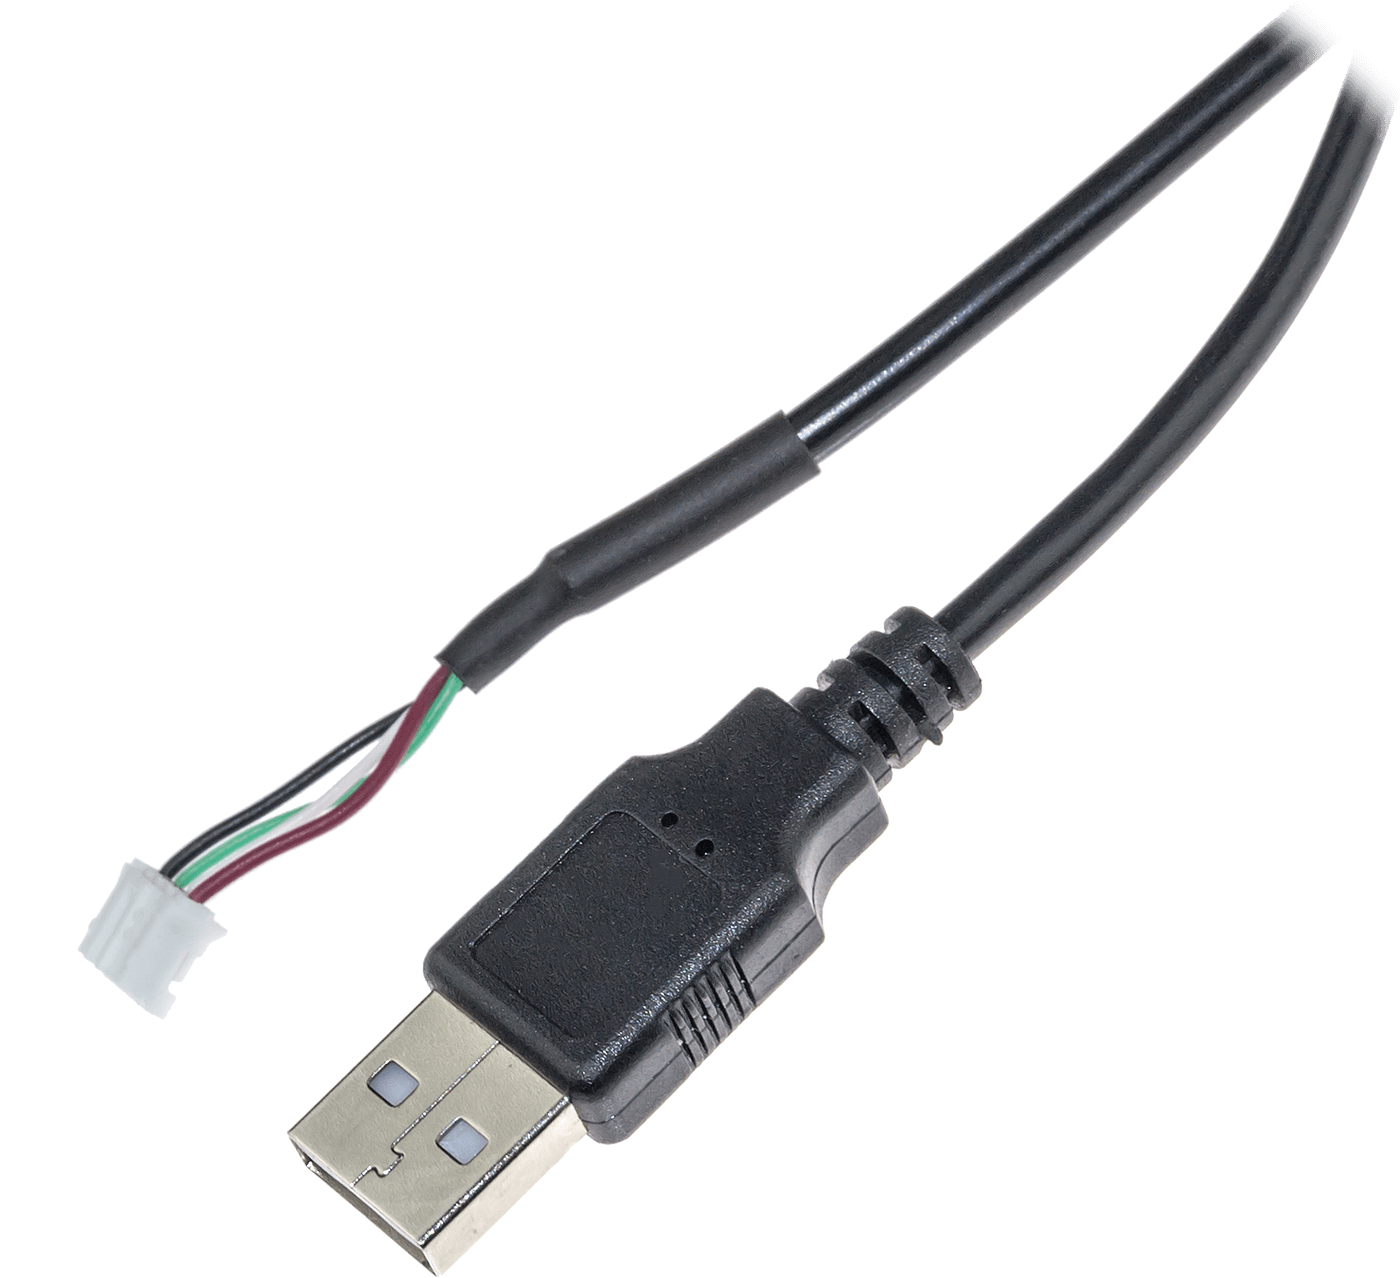 U S B Cable Damaged Exposed Wires PNG